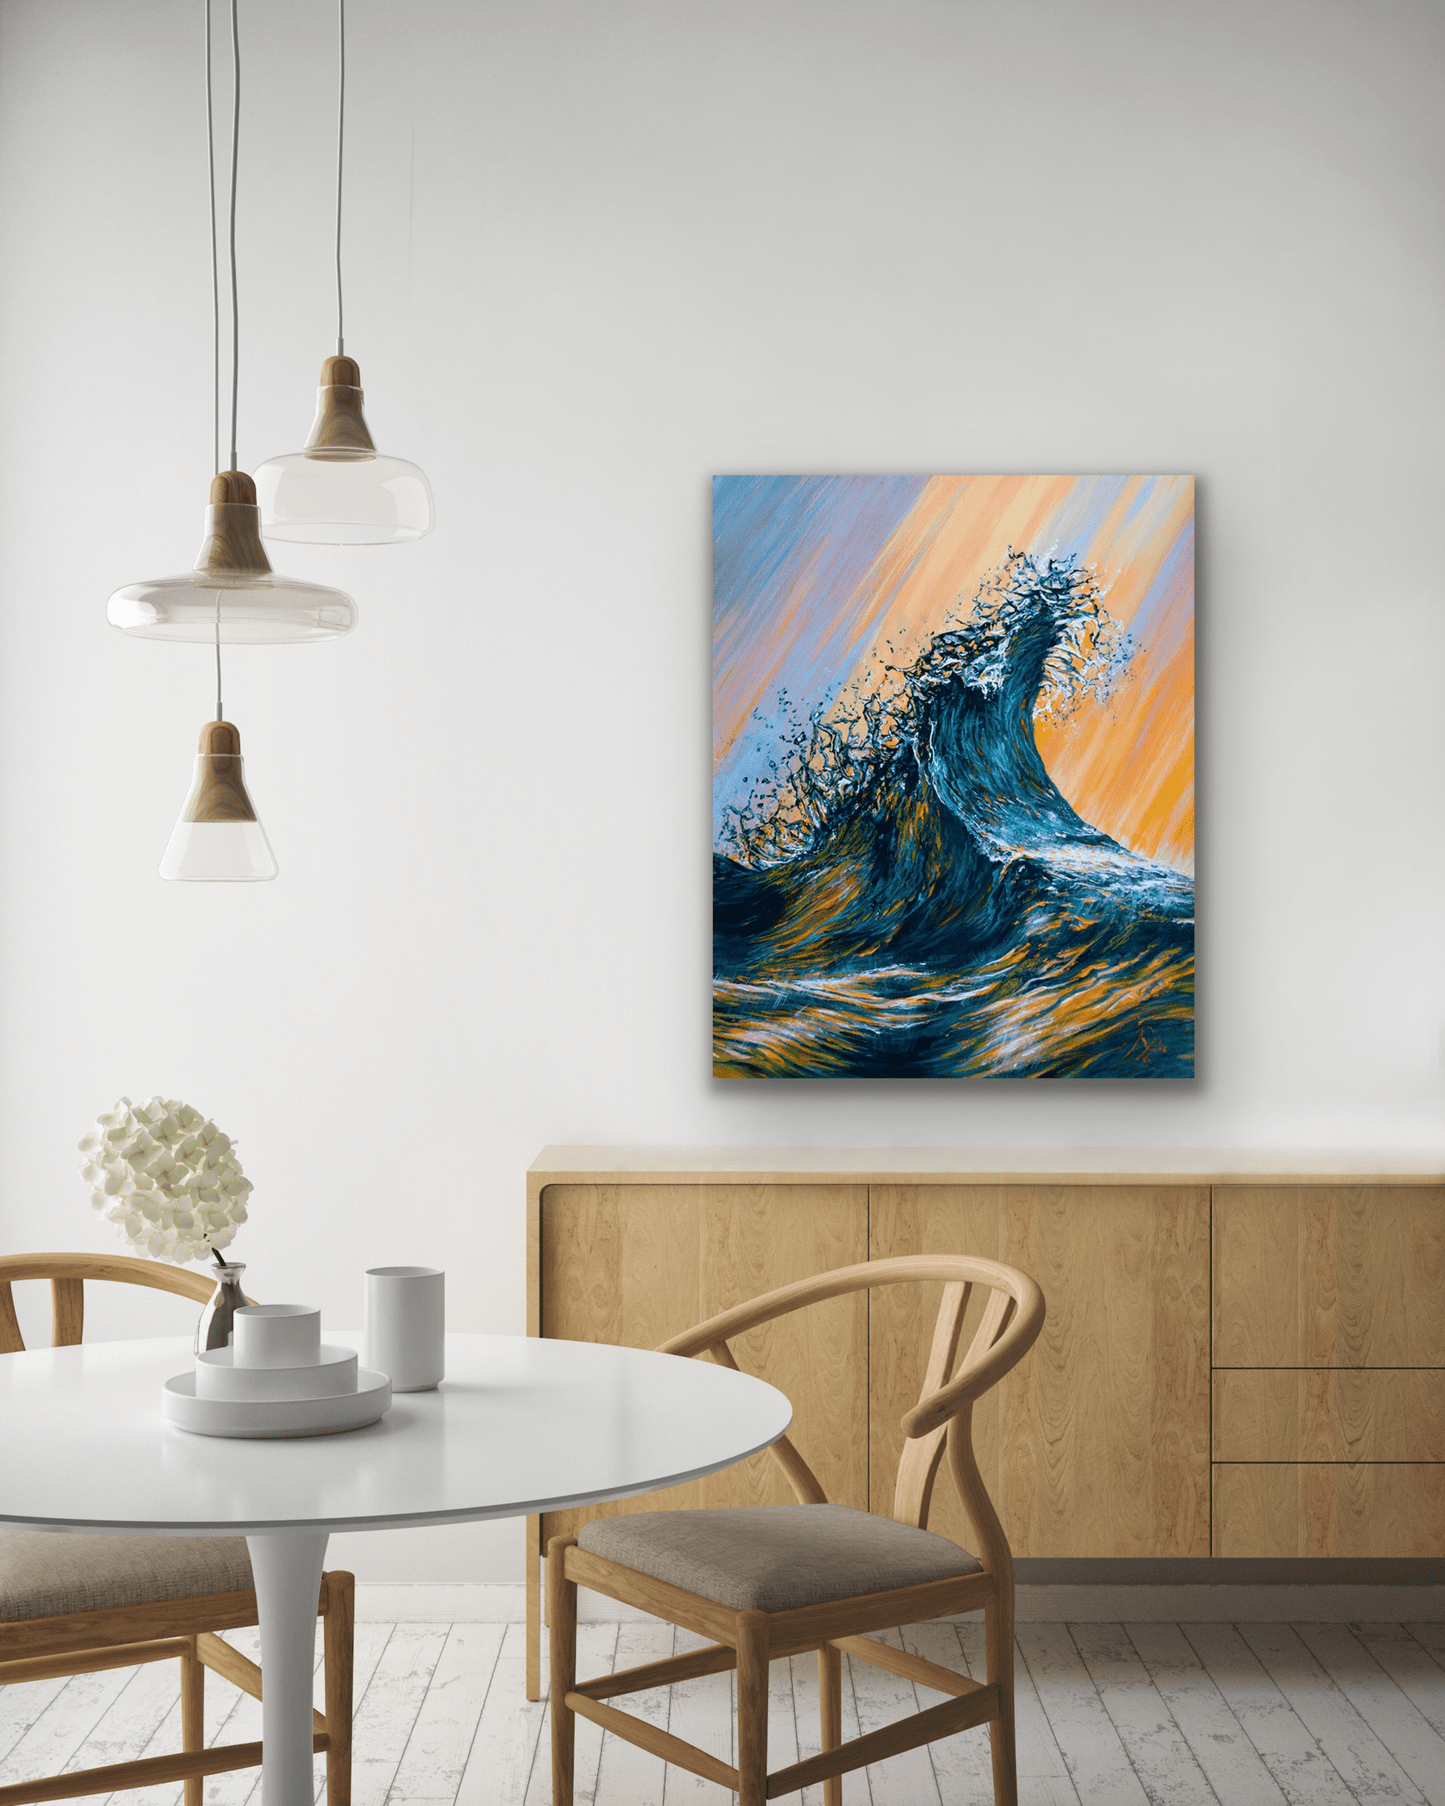 This lively canvas print of a wave comes in five different sizes to fit your wall perfectly.